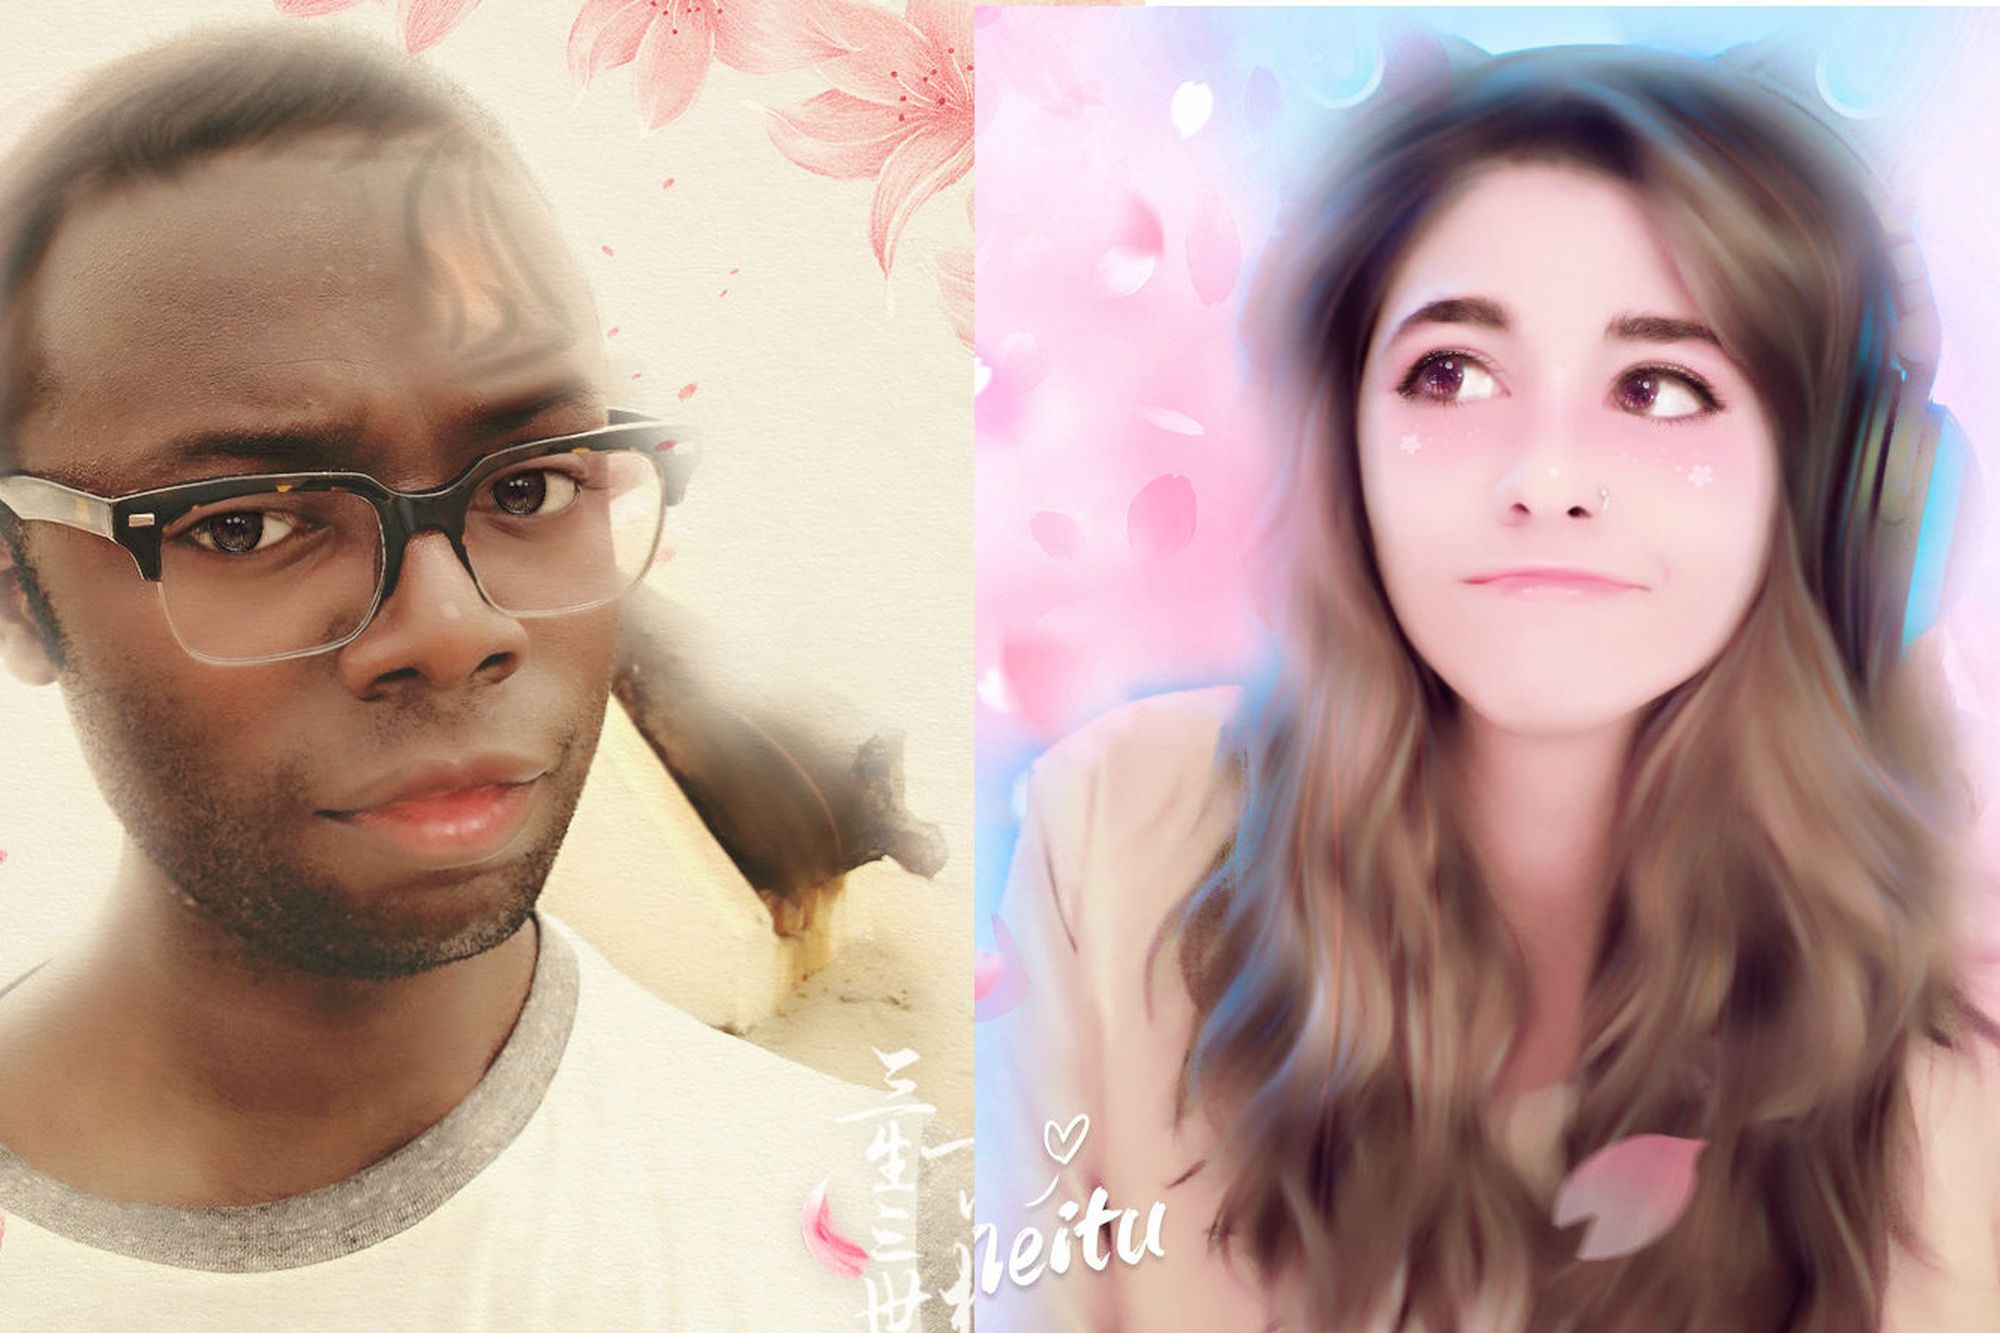 The Meitu app will turn anyone into a beautiful, terrifying anime character  - The Verge